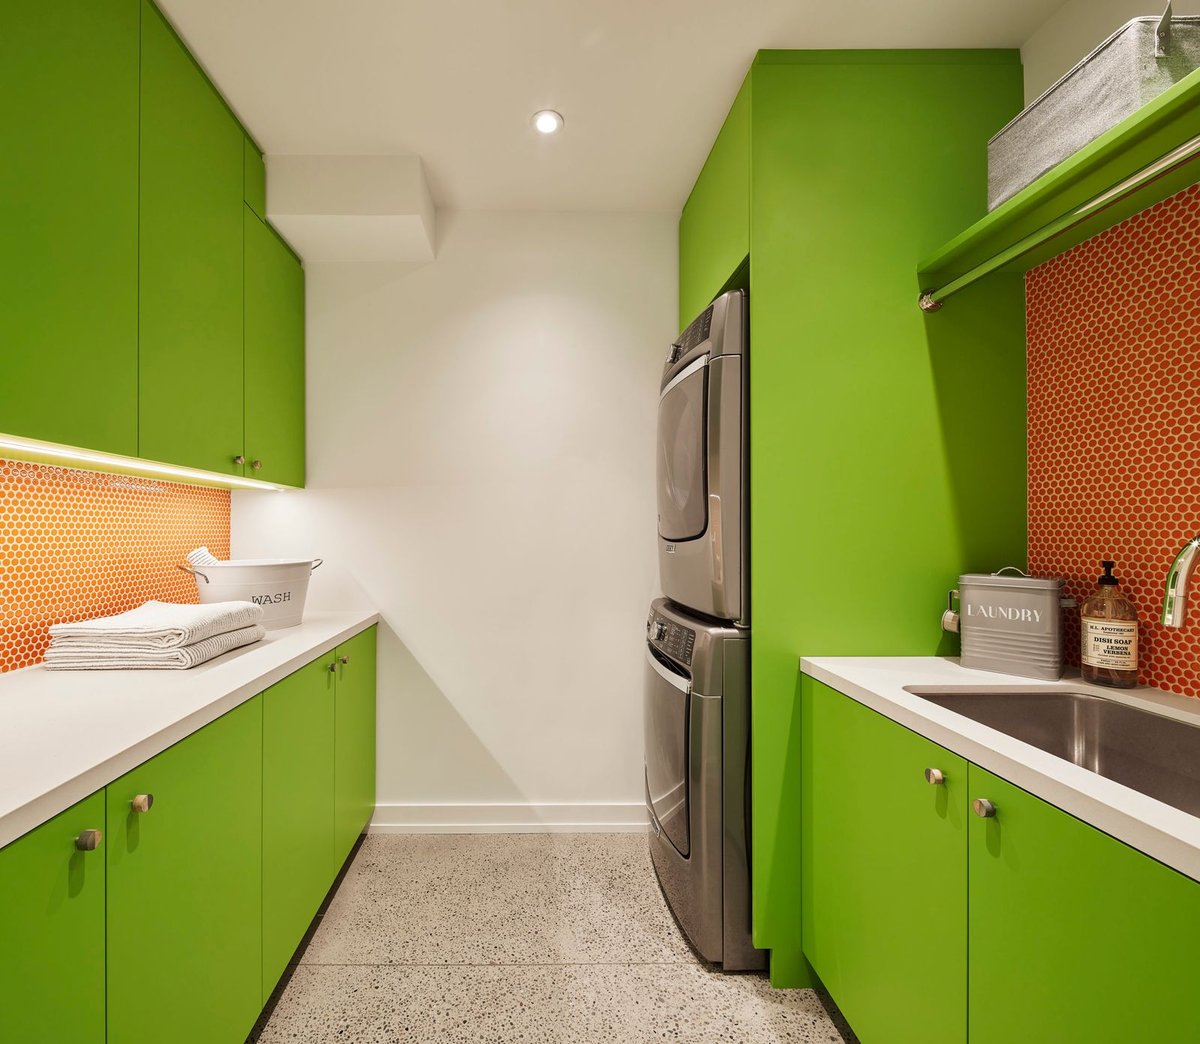 Laundry room in basement with green cabinets and orange tiled backsplash 